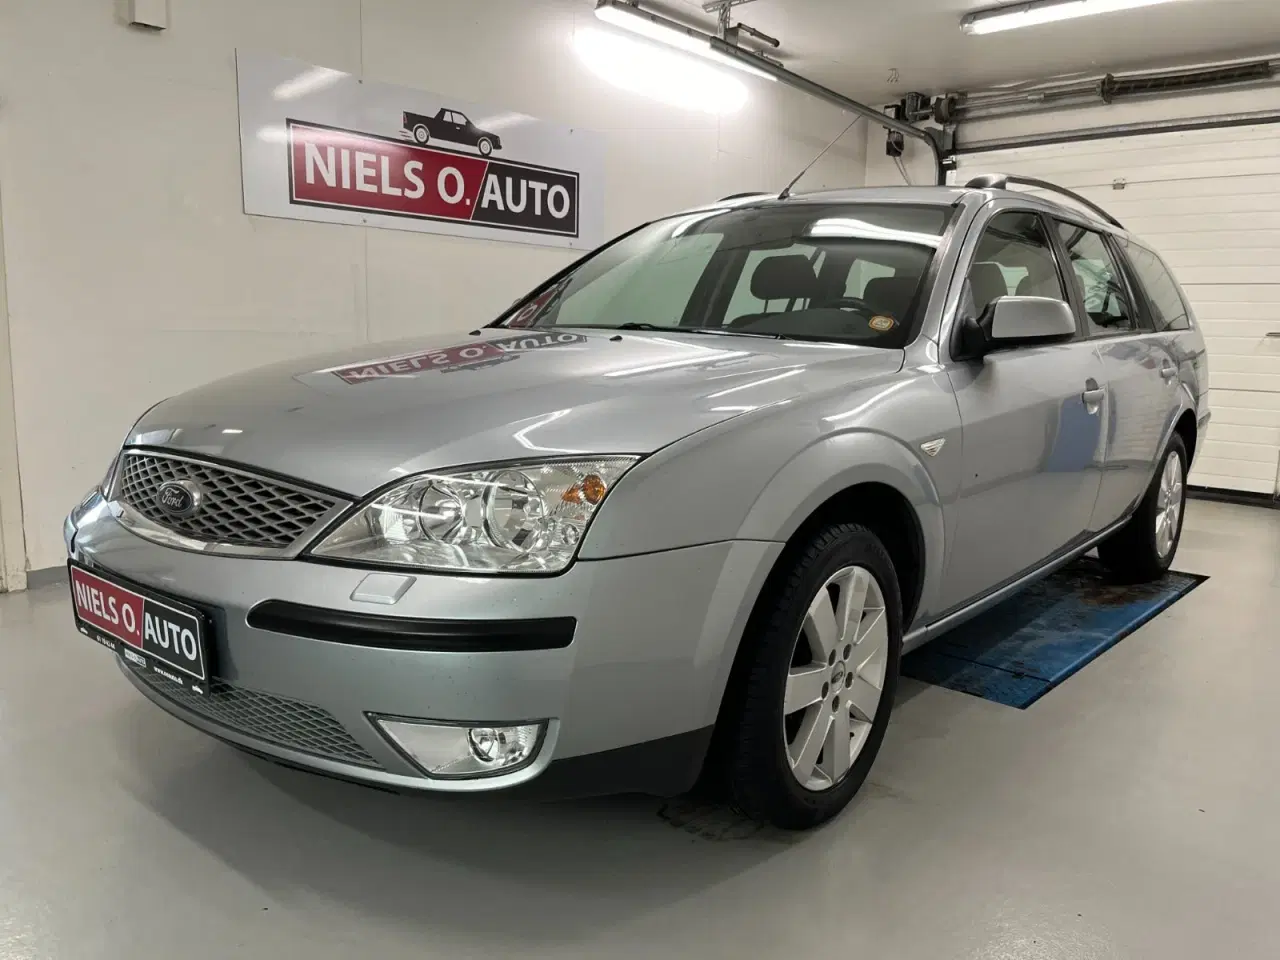 Billede 1 - Ford Mondeo 2,0 145 Trend stc.